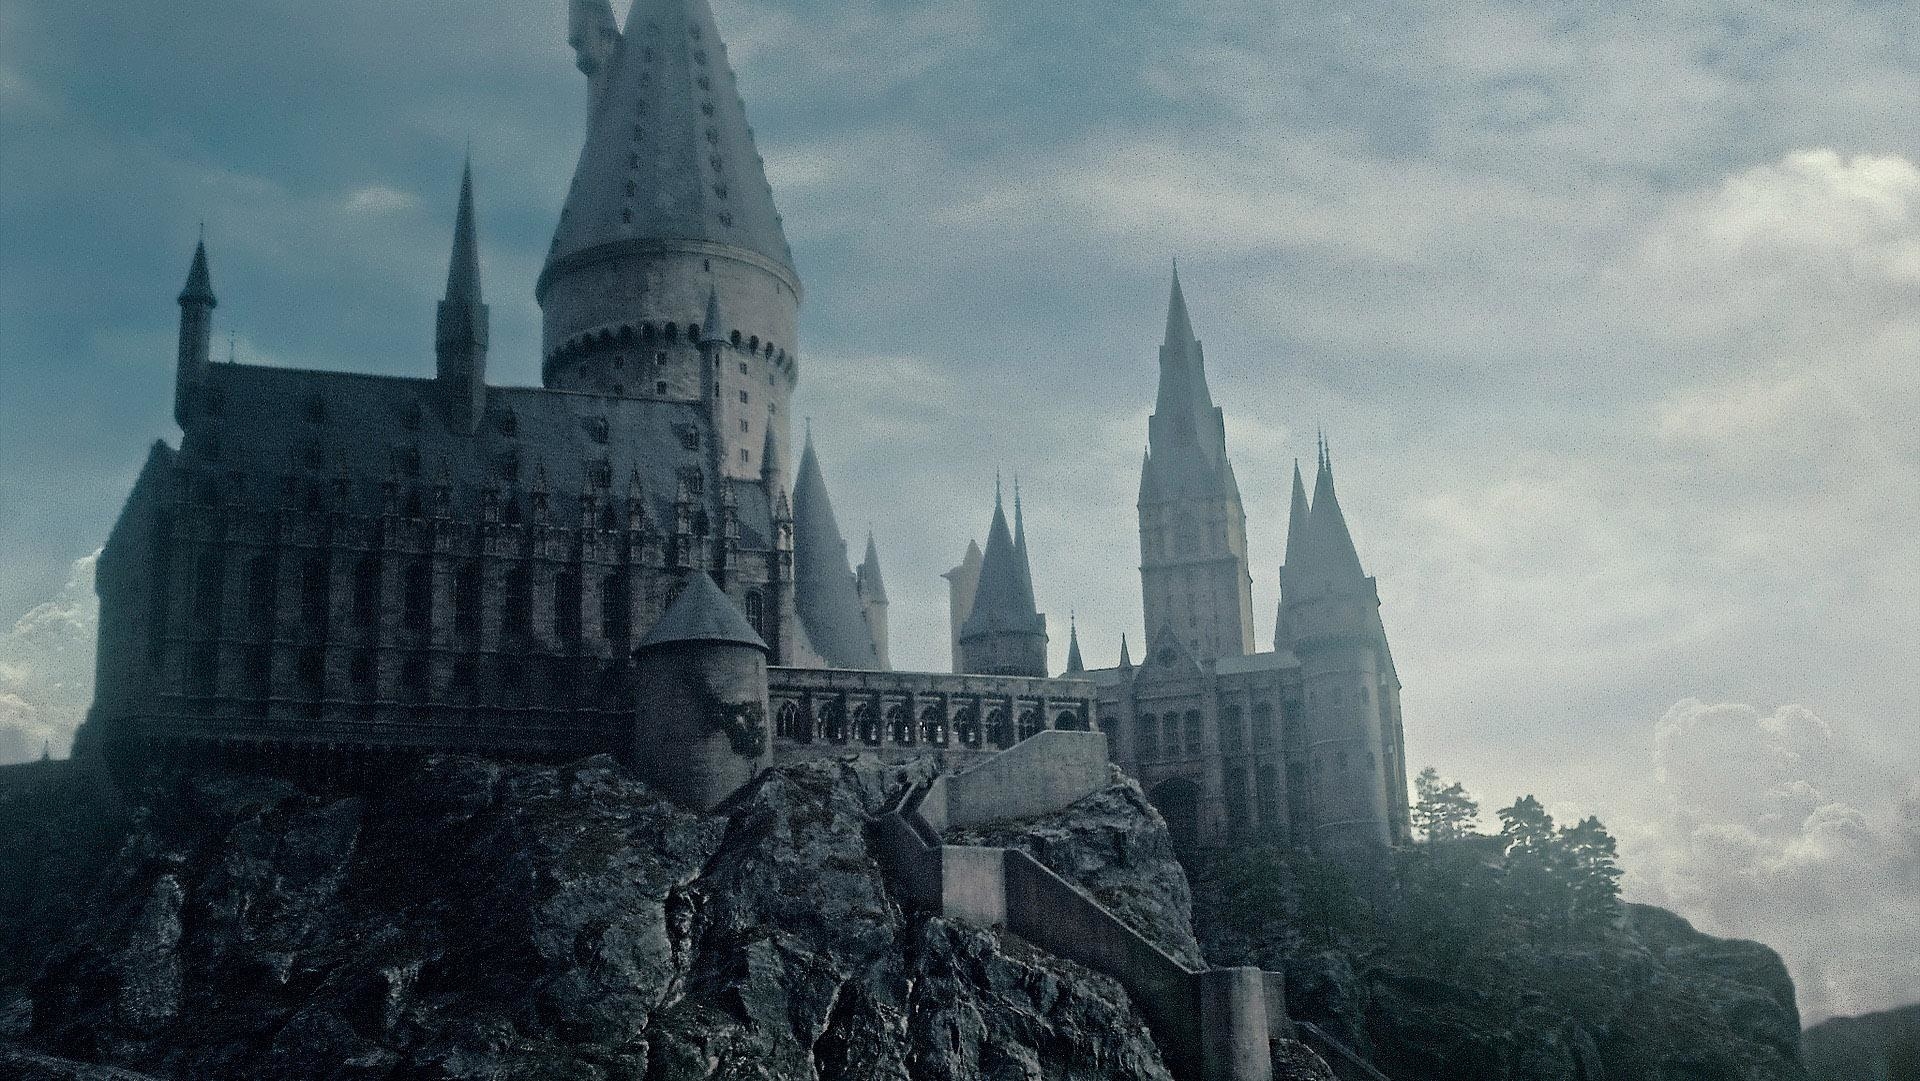 An exterior shot of the grand castle of Hogwarts